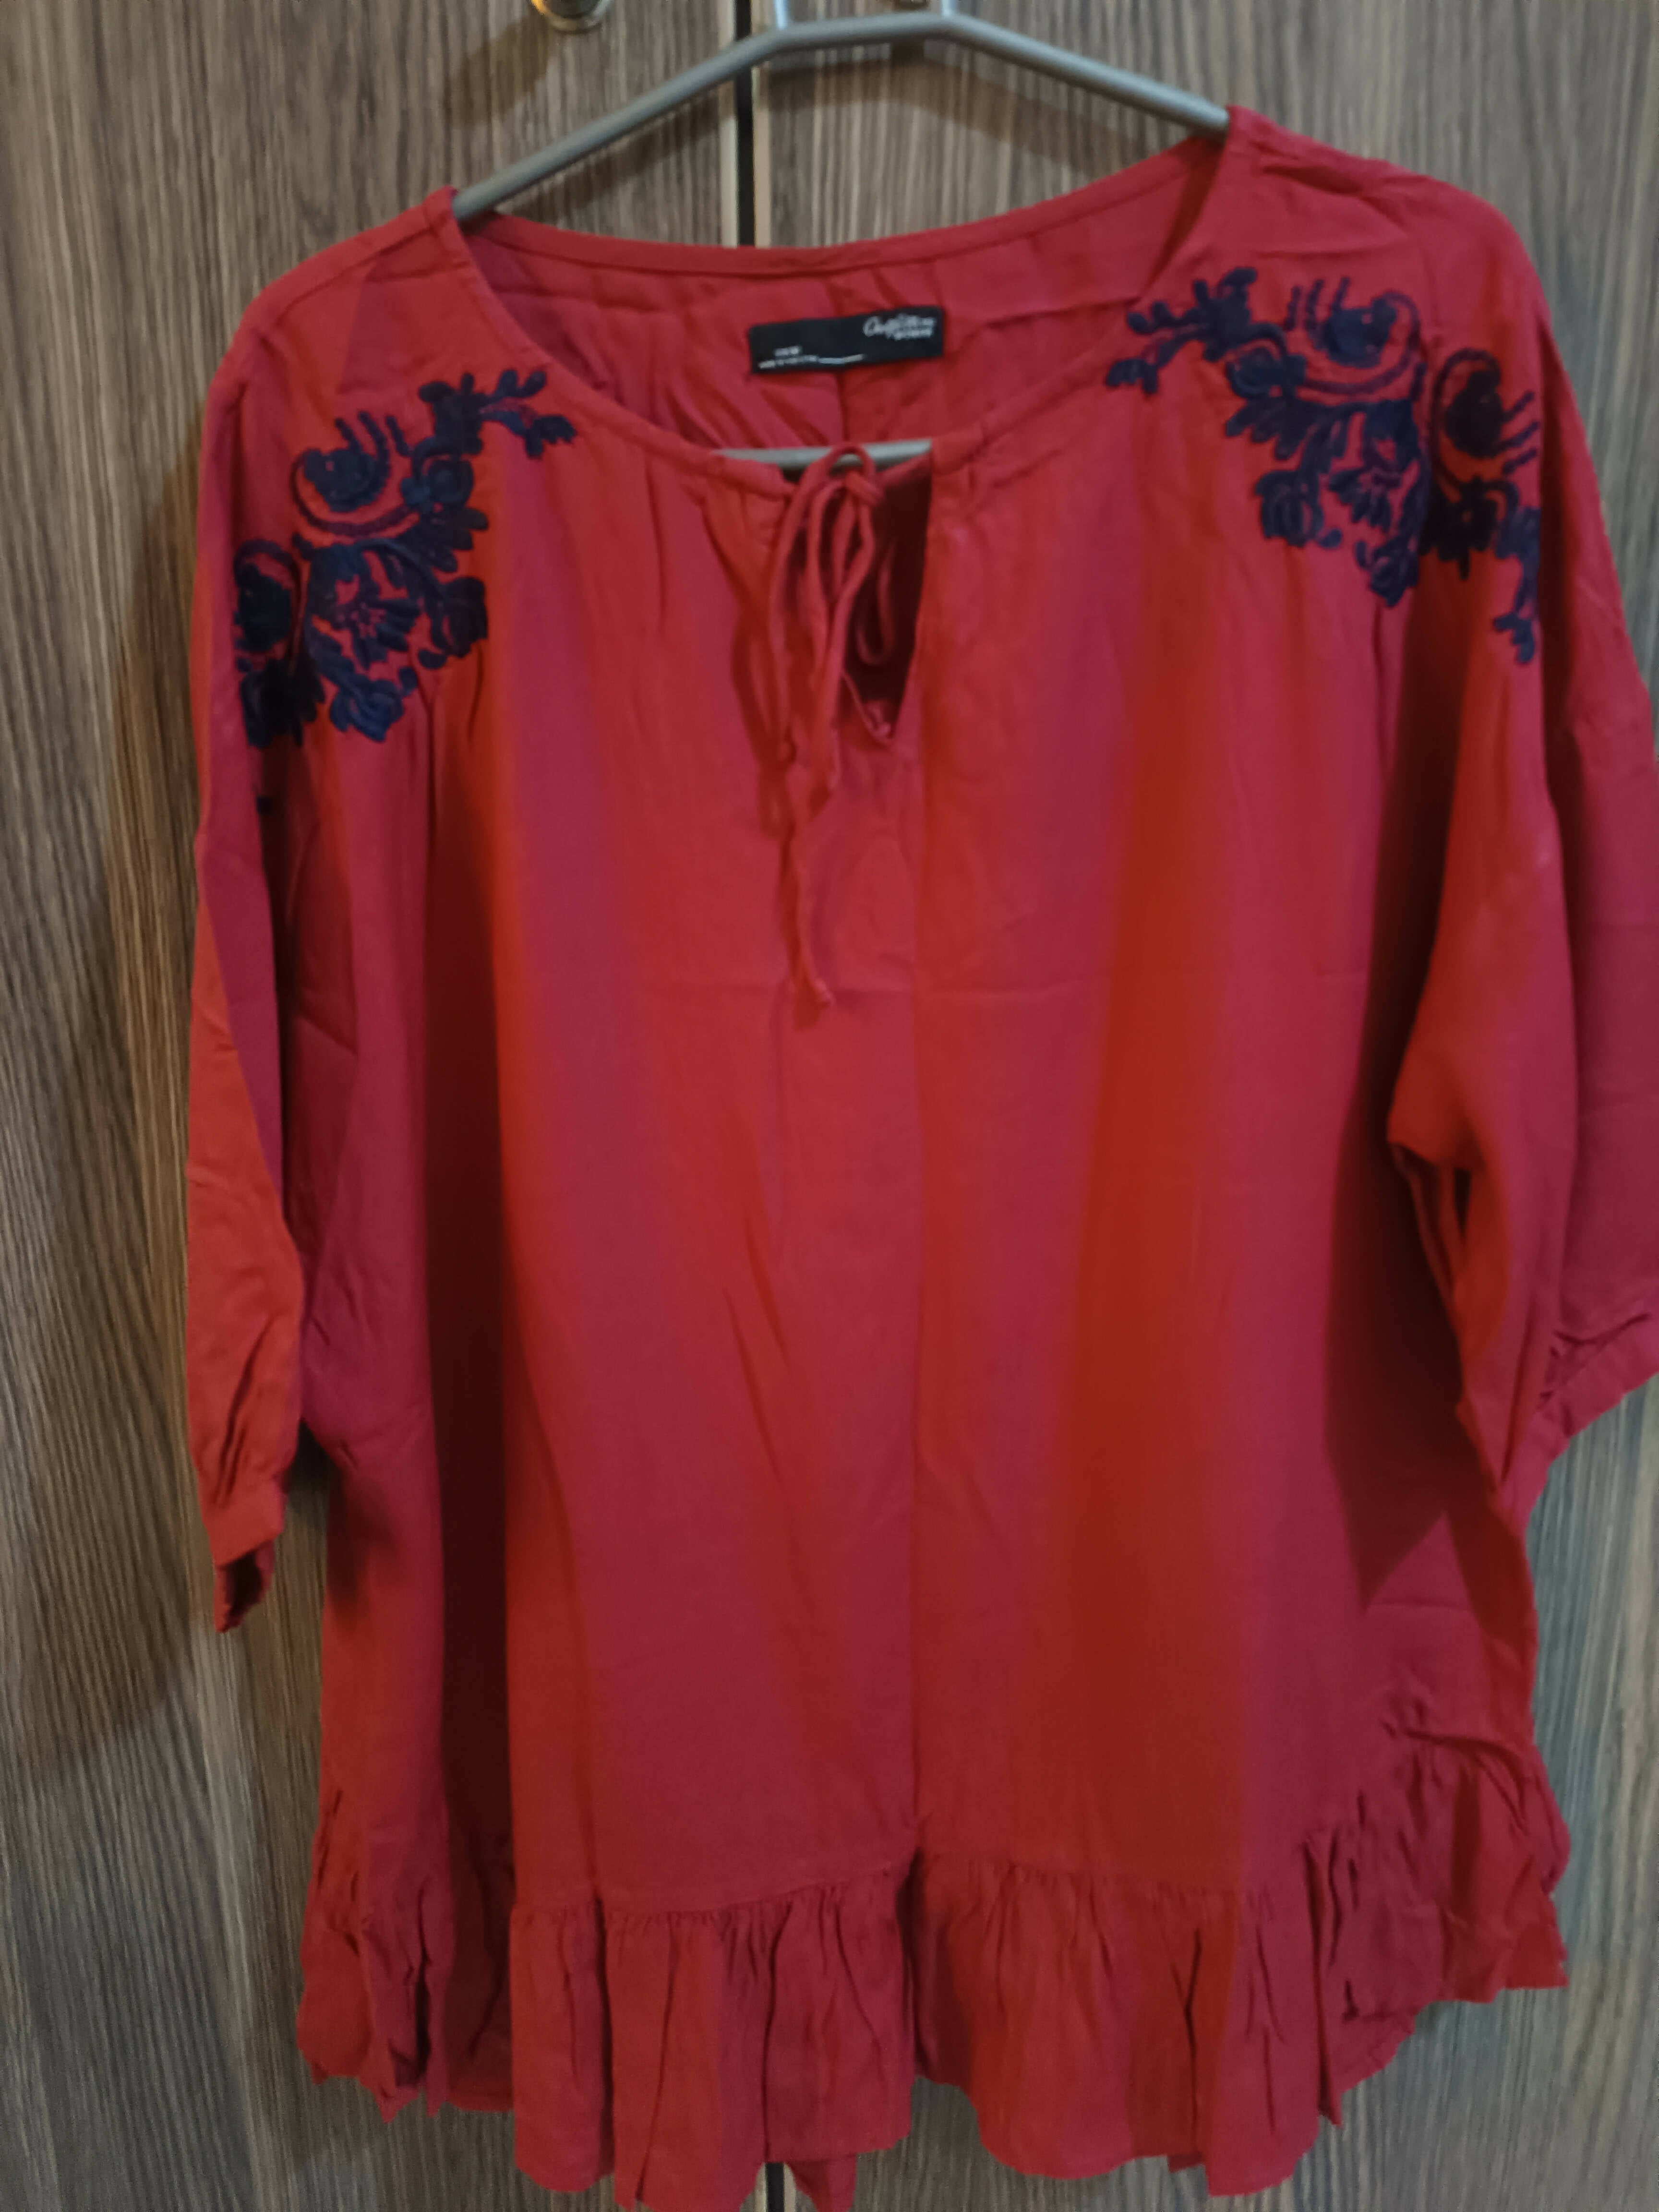 Outfitters | Pink Color Shirt | Women Tops & Shirts | Medium | Worn Once